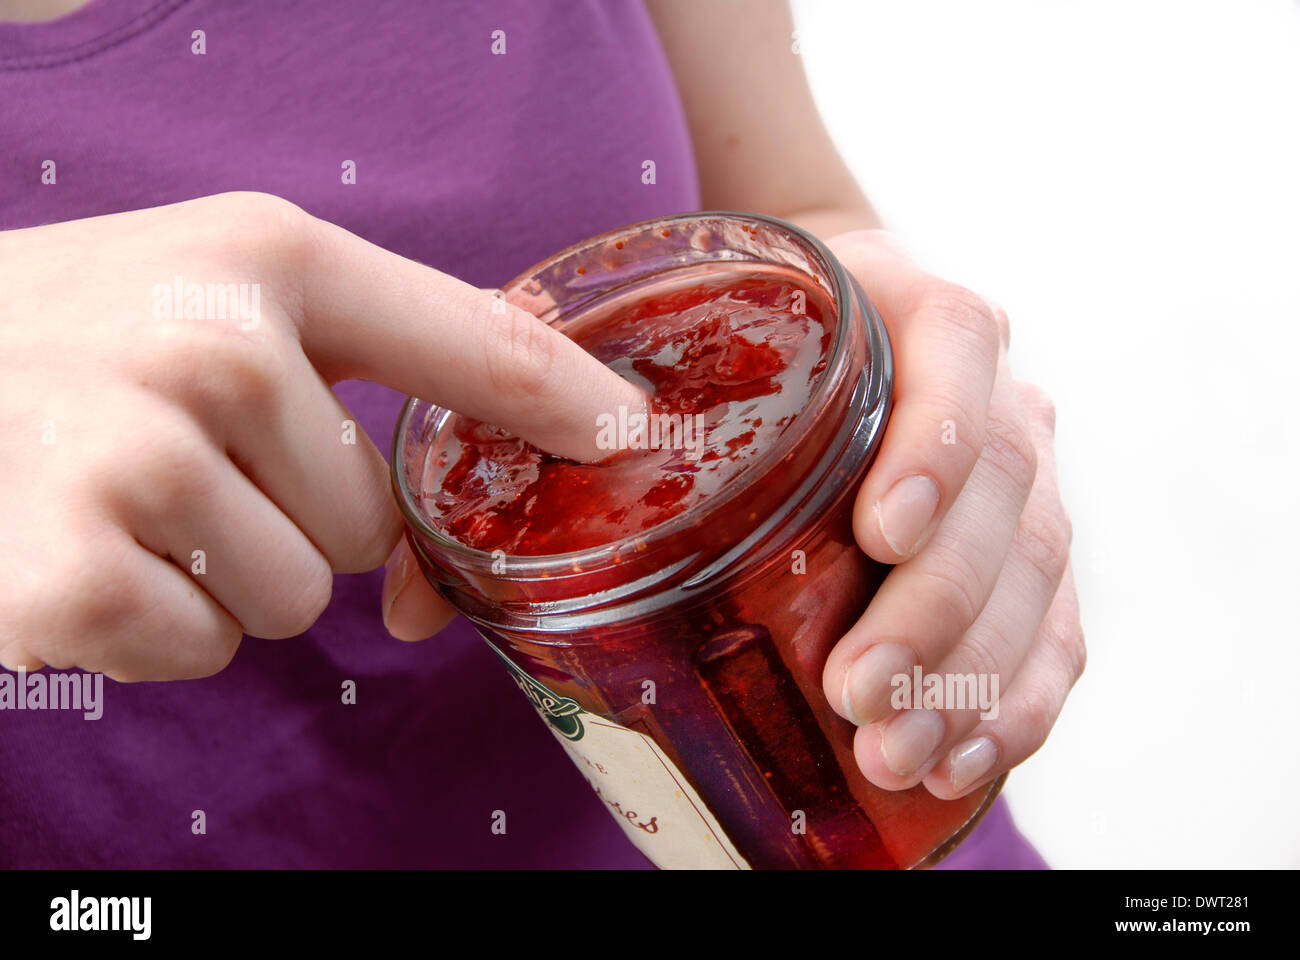 Adolescent eating sweets Stock Photo